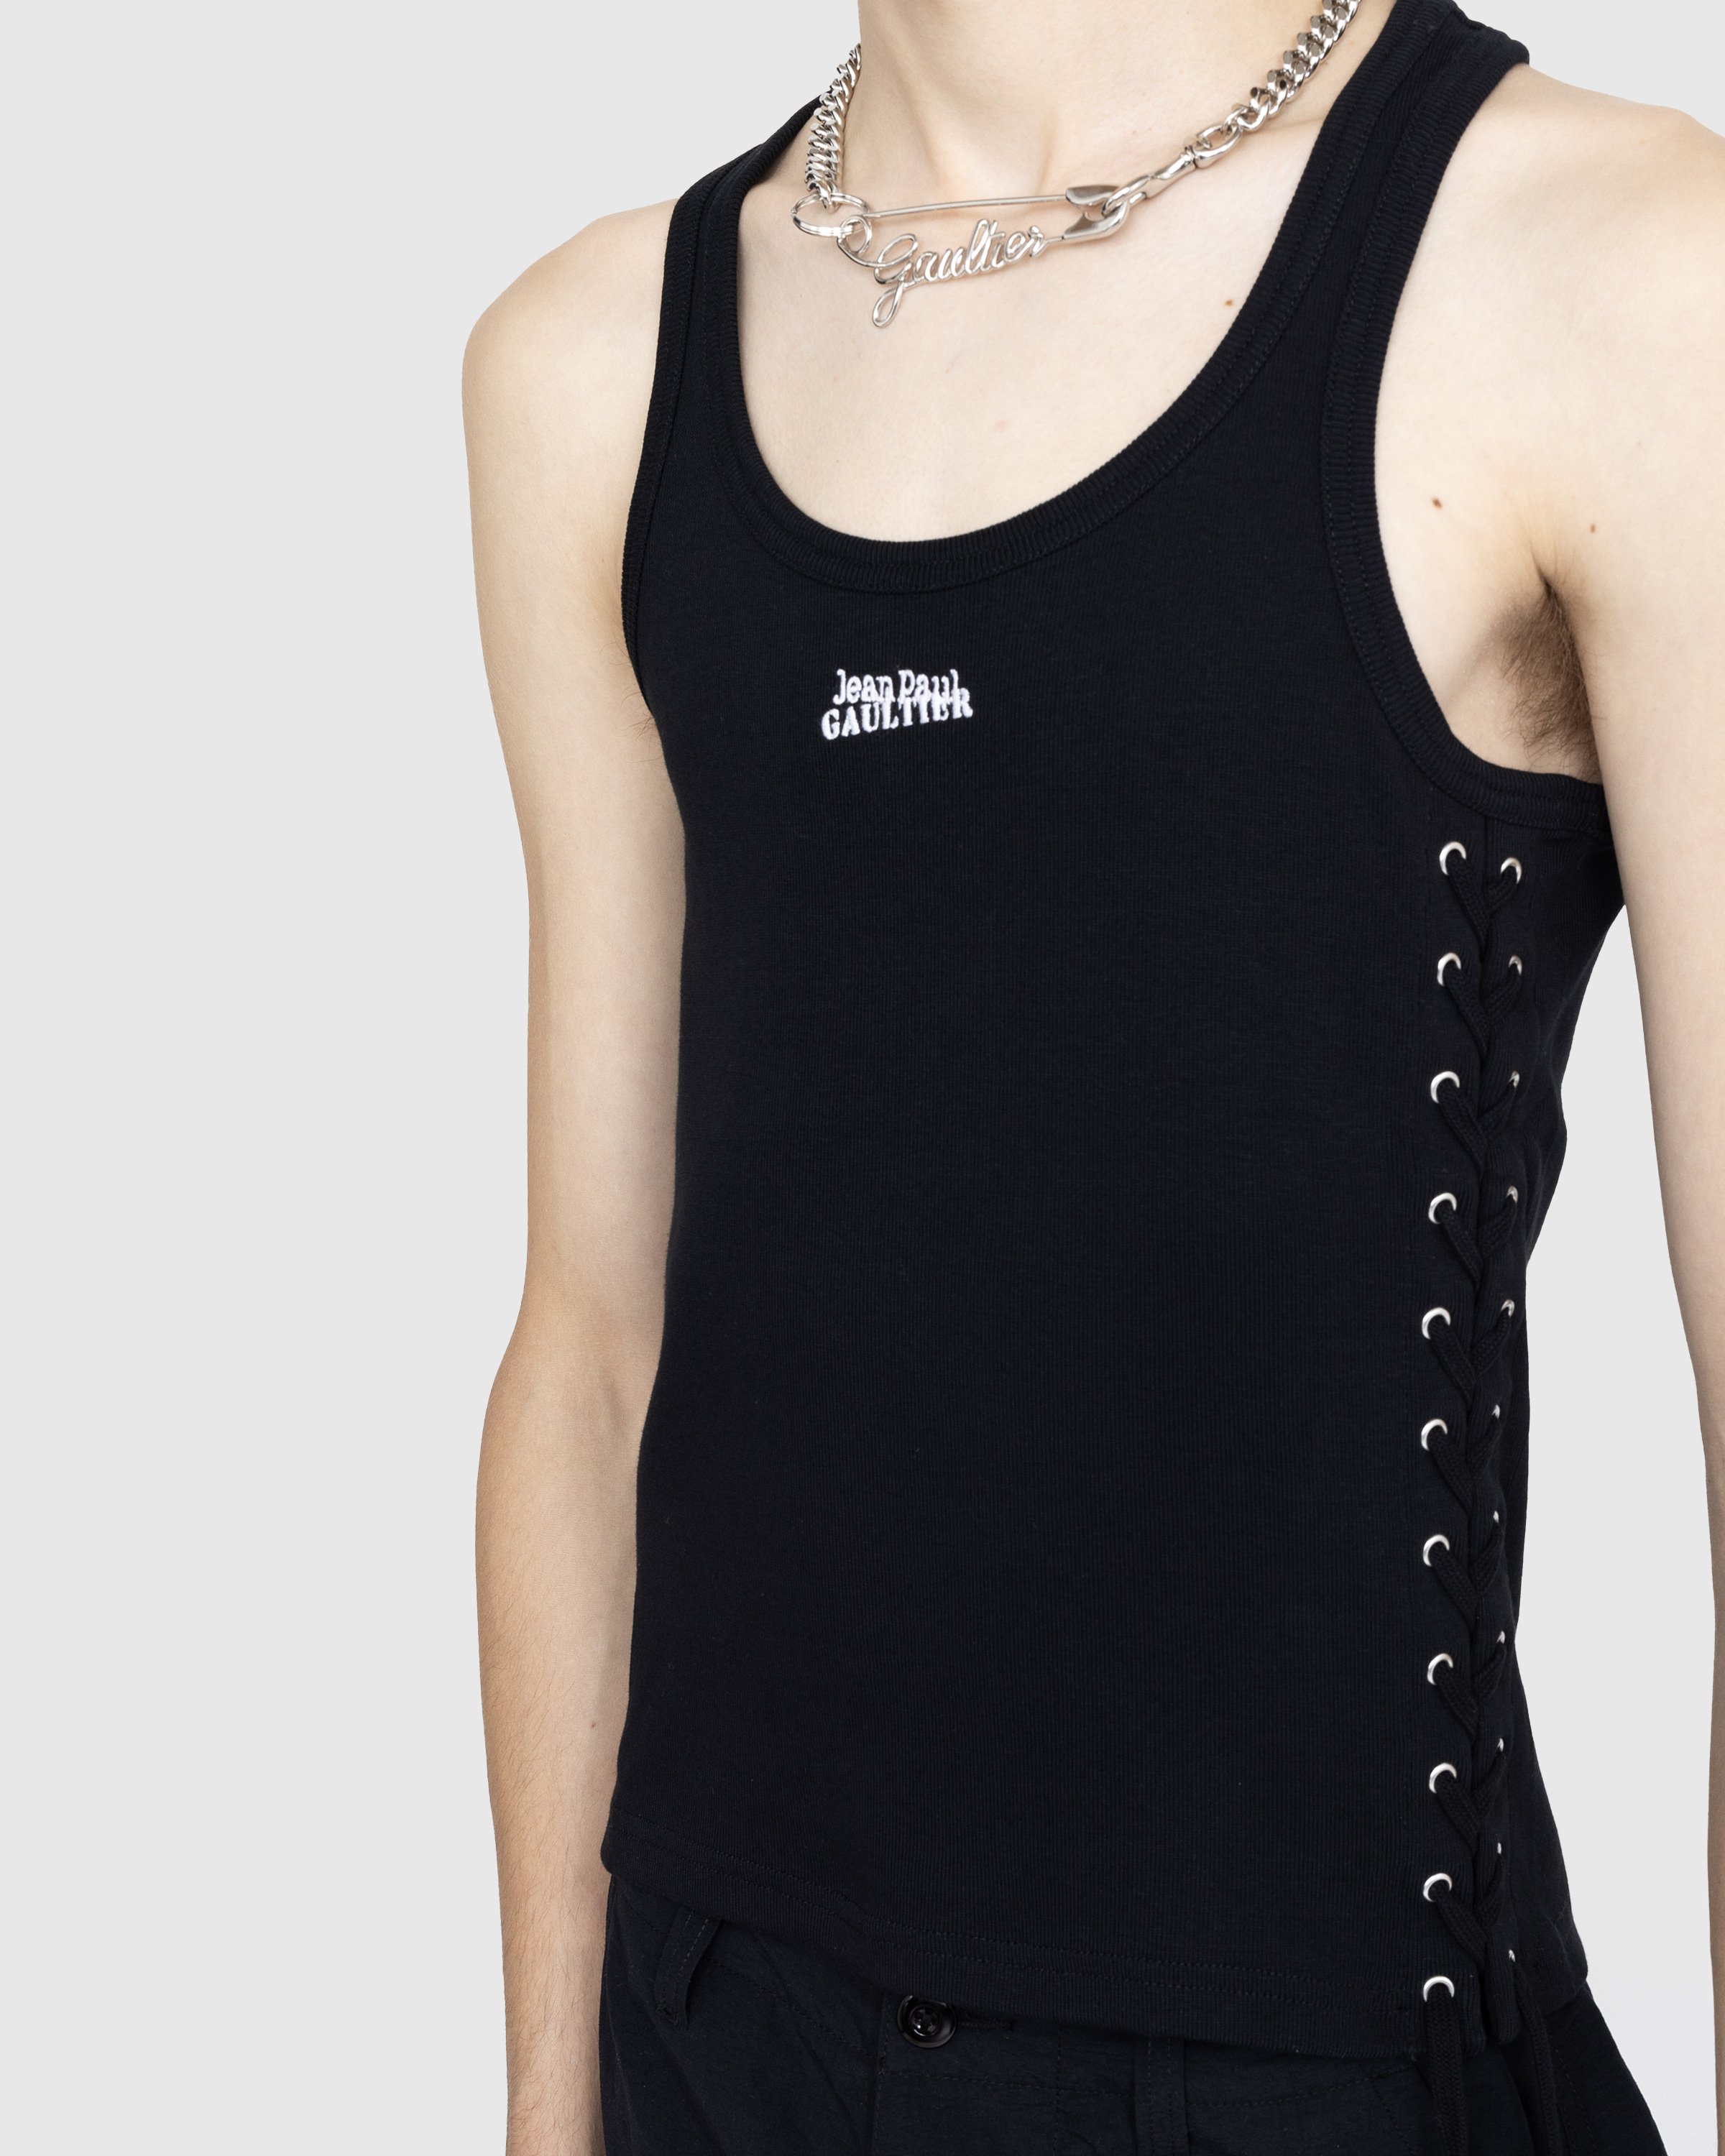 Jean Paul Gaultier - Laced Tank Top Black - Clothing - Black - Image 4